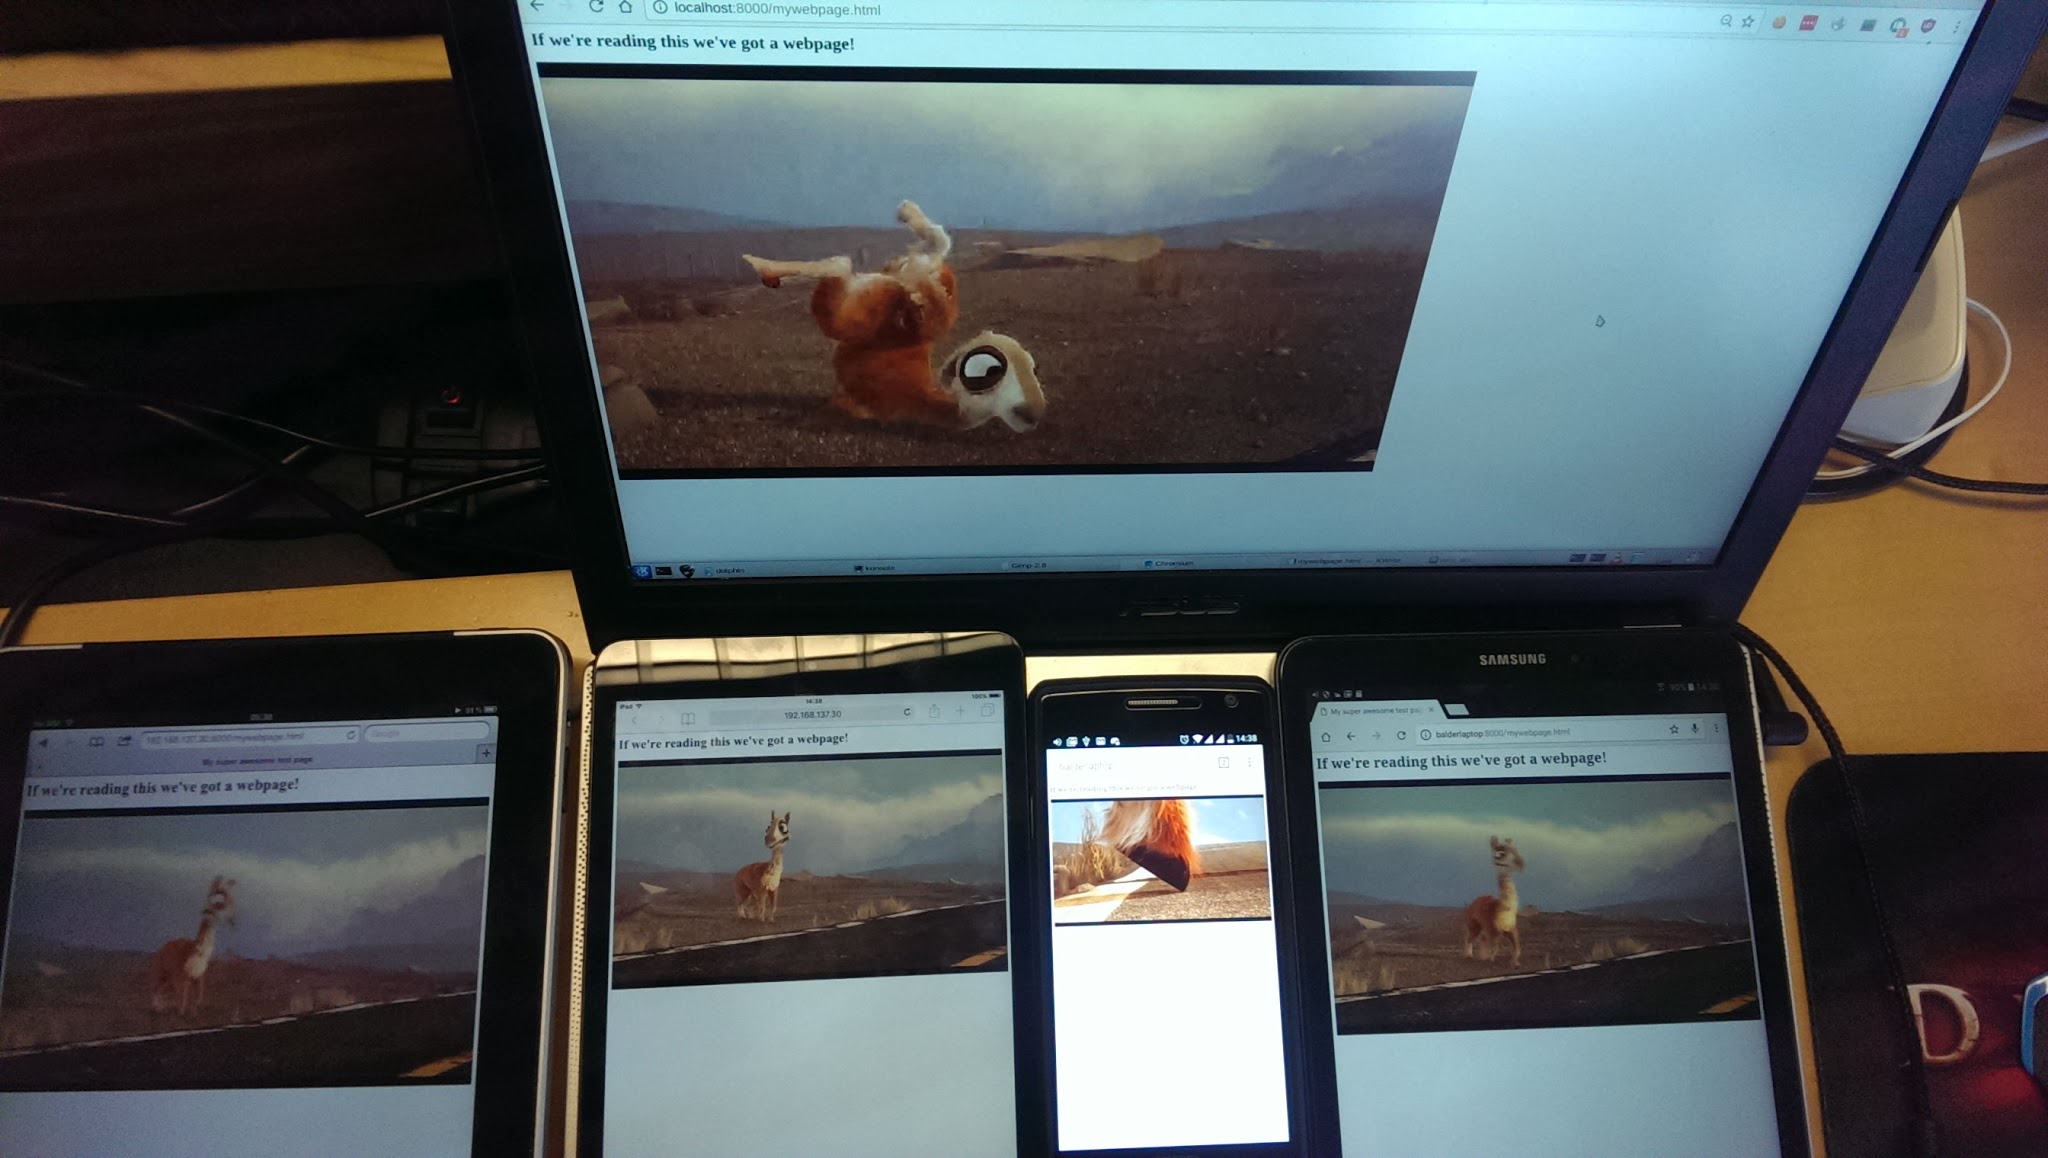 Image of video playback on multiple devices